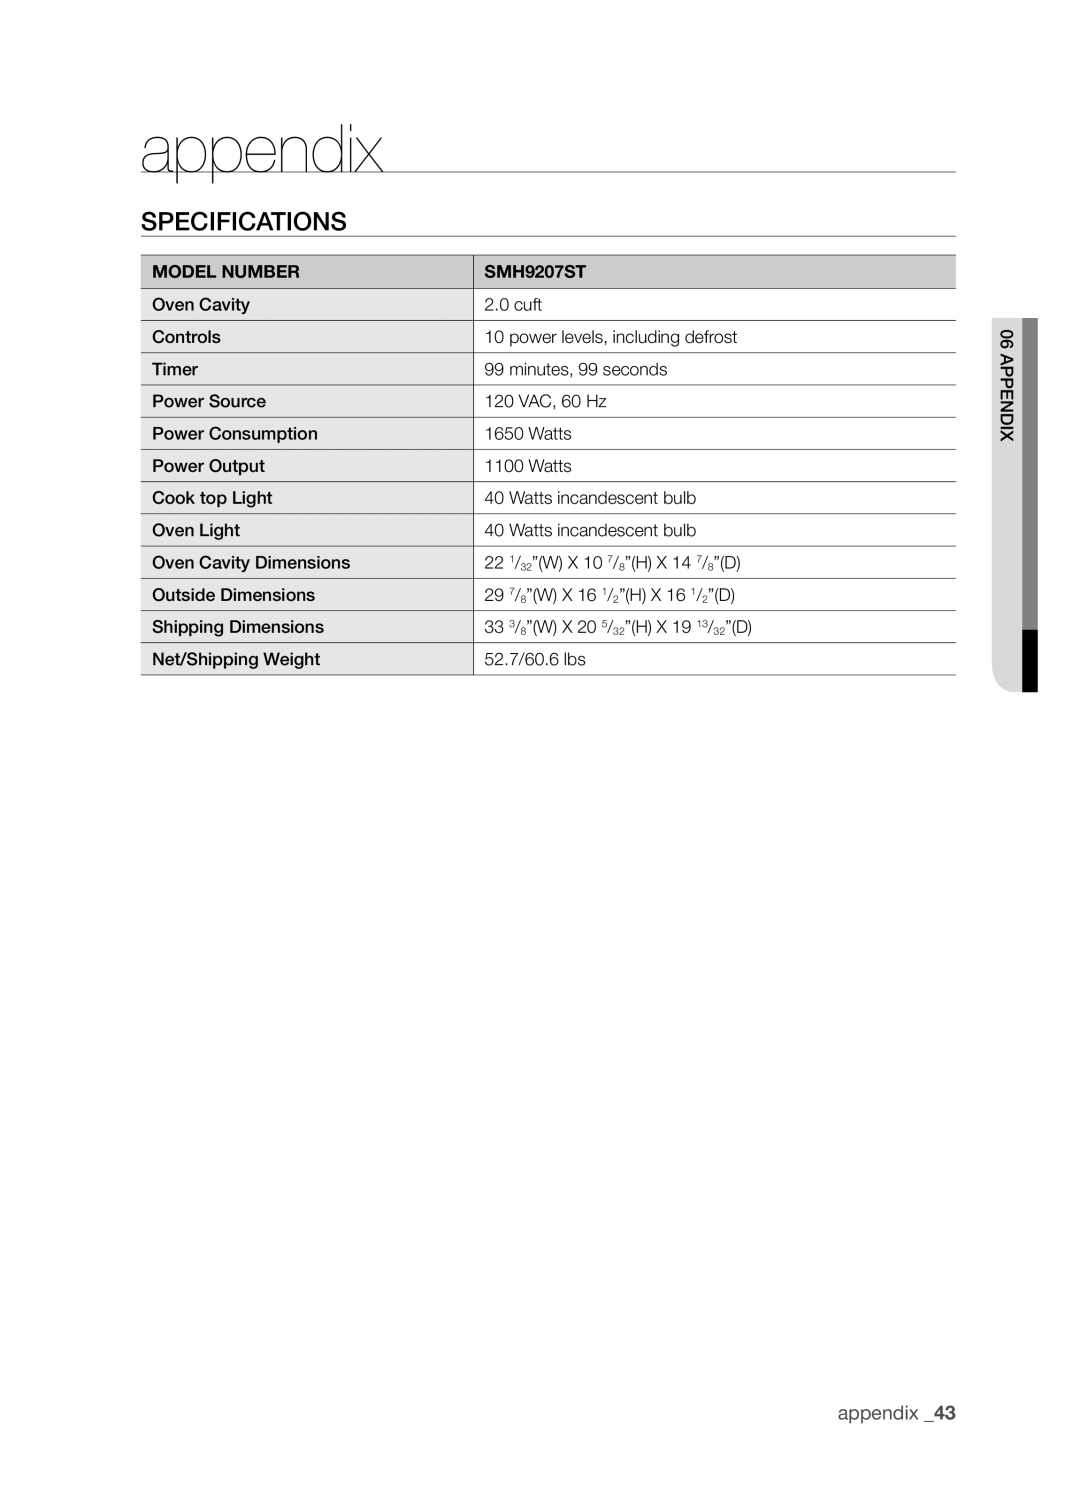 Samsung SMH9207ST user manual appendix, Specifications 